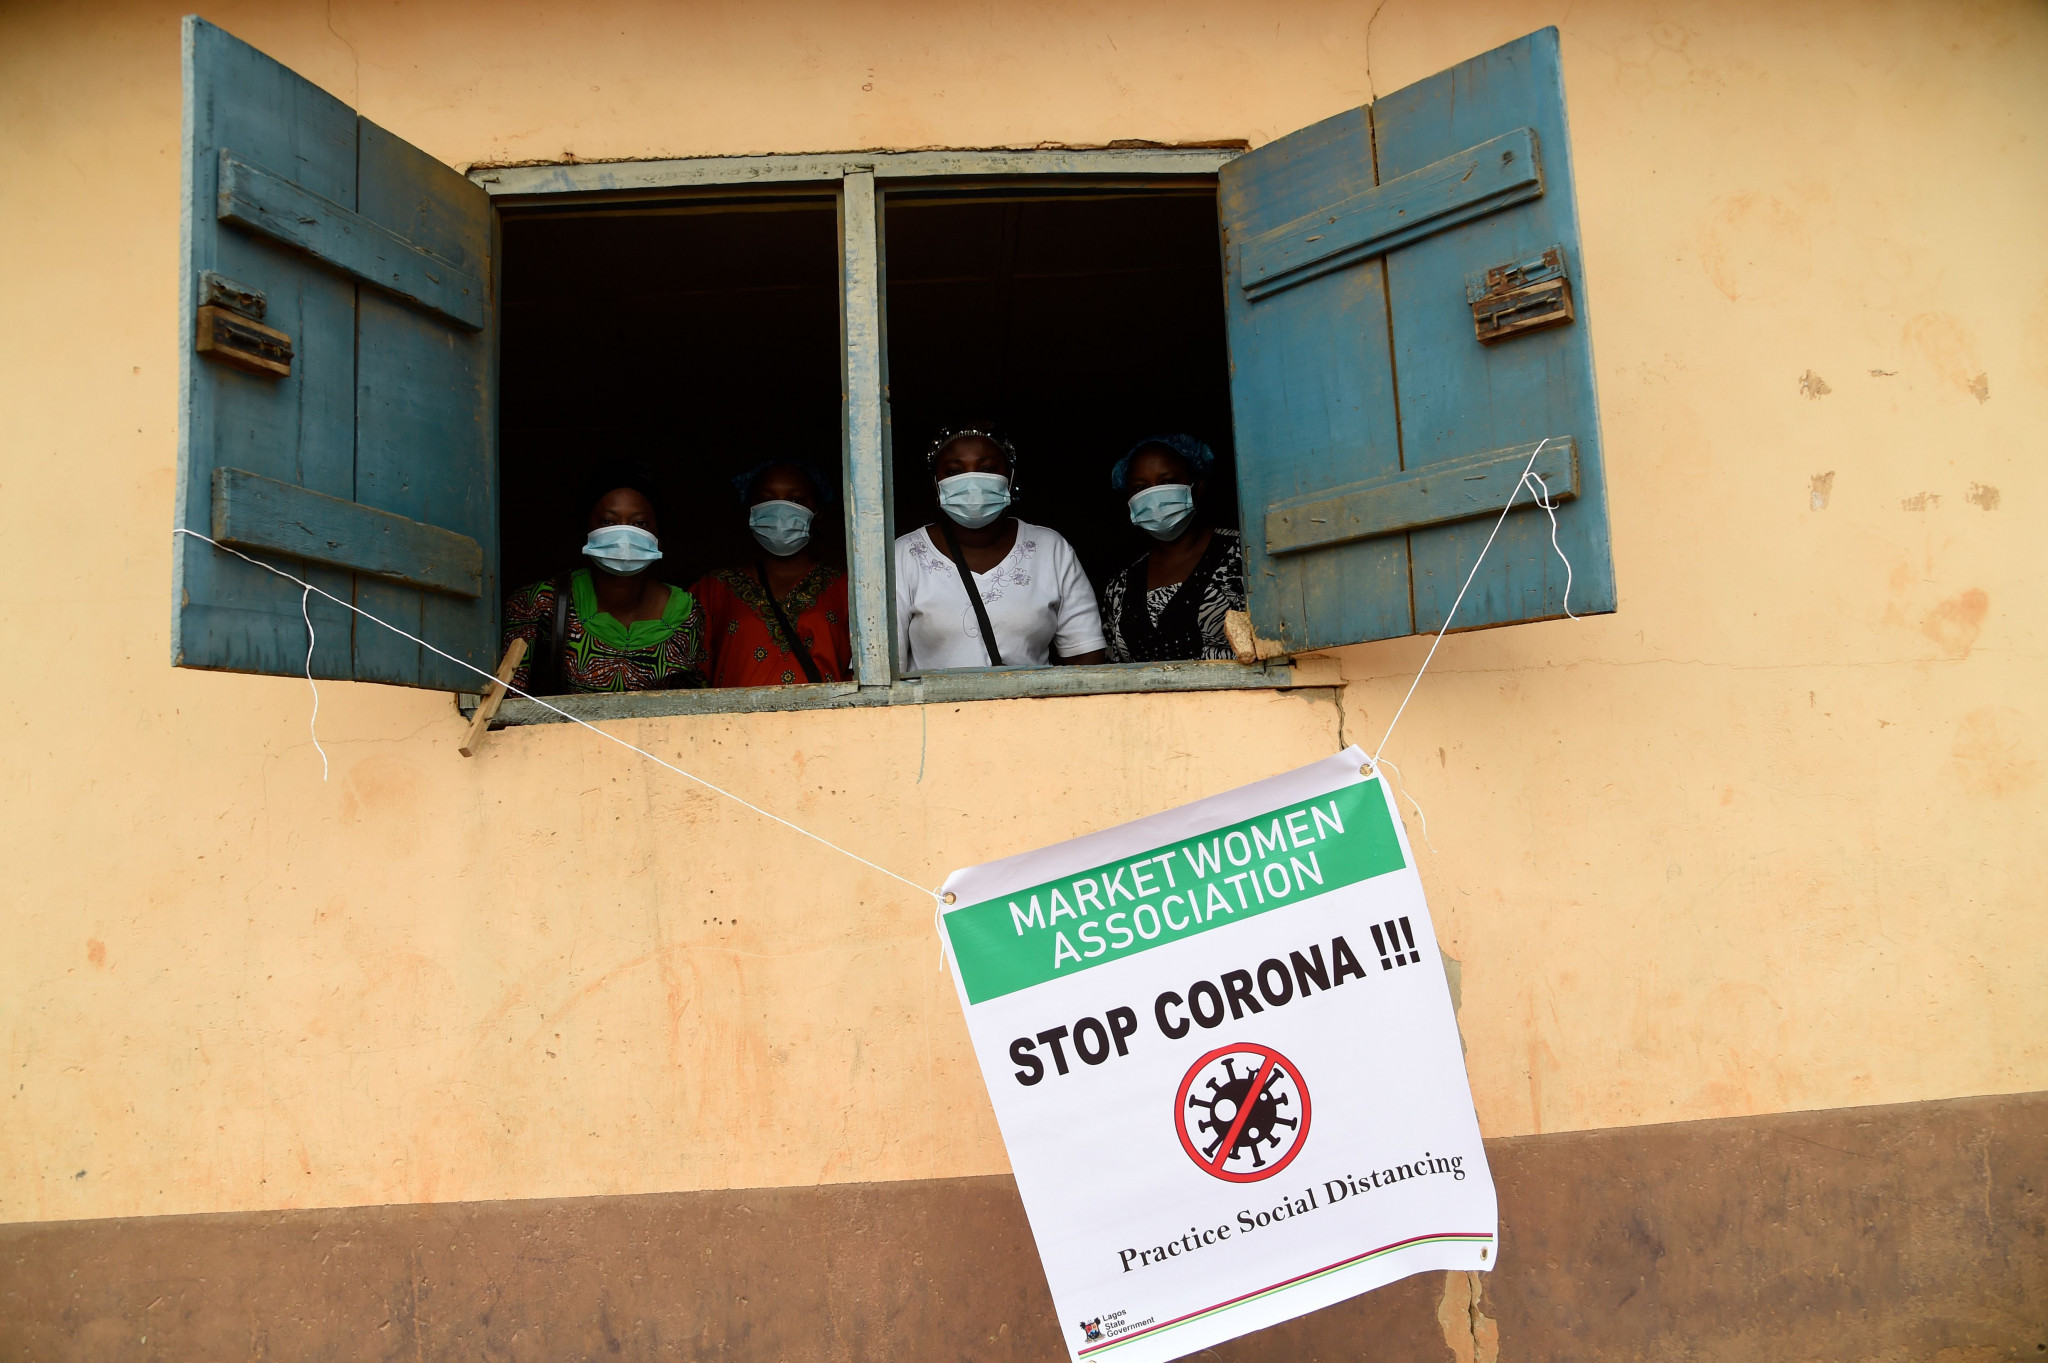 The Nigerian Government has warned tighter restrictions will likely be needed as the country enters a third wave of the COVID-19 pandemic ©Getty Images